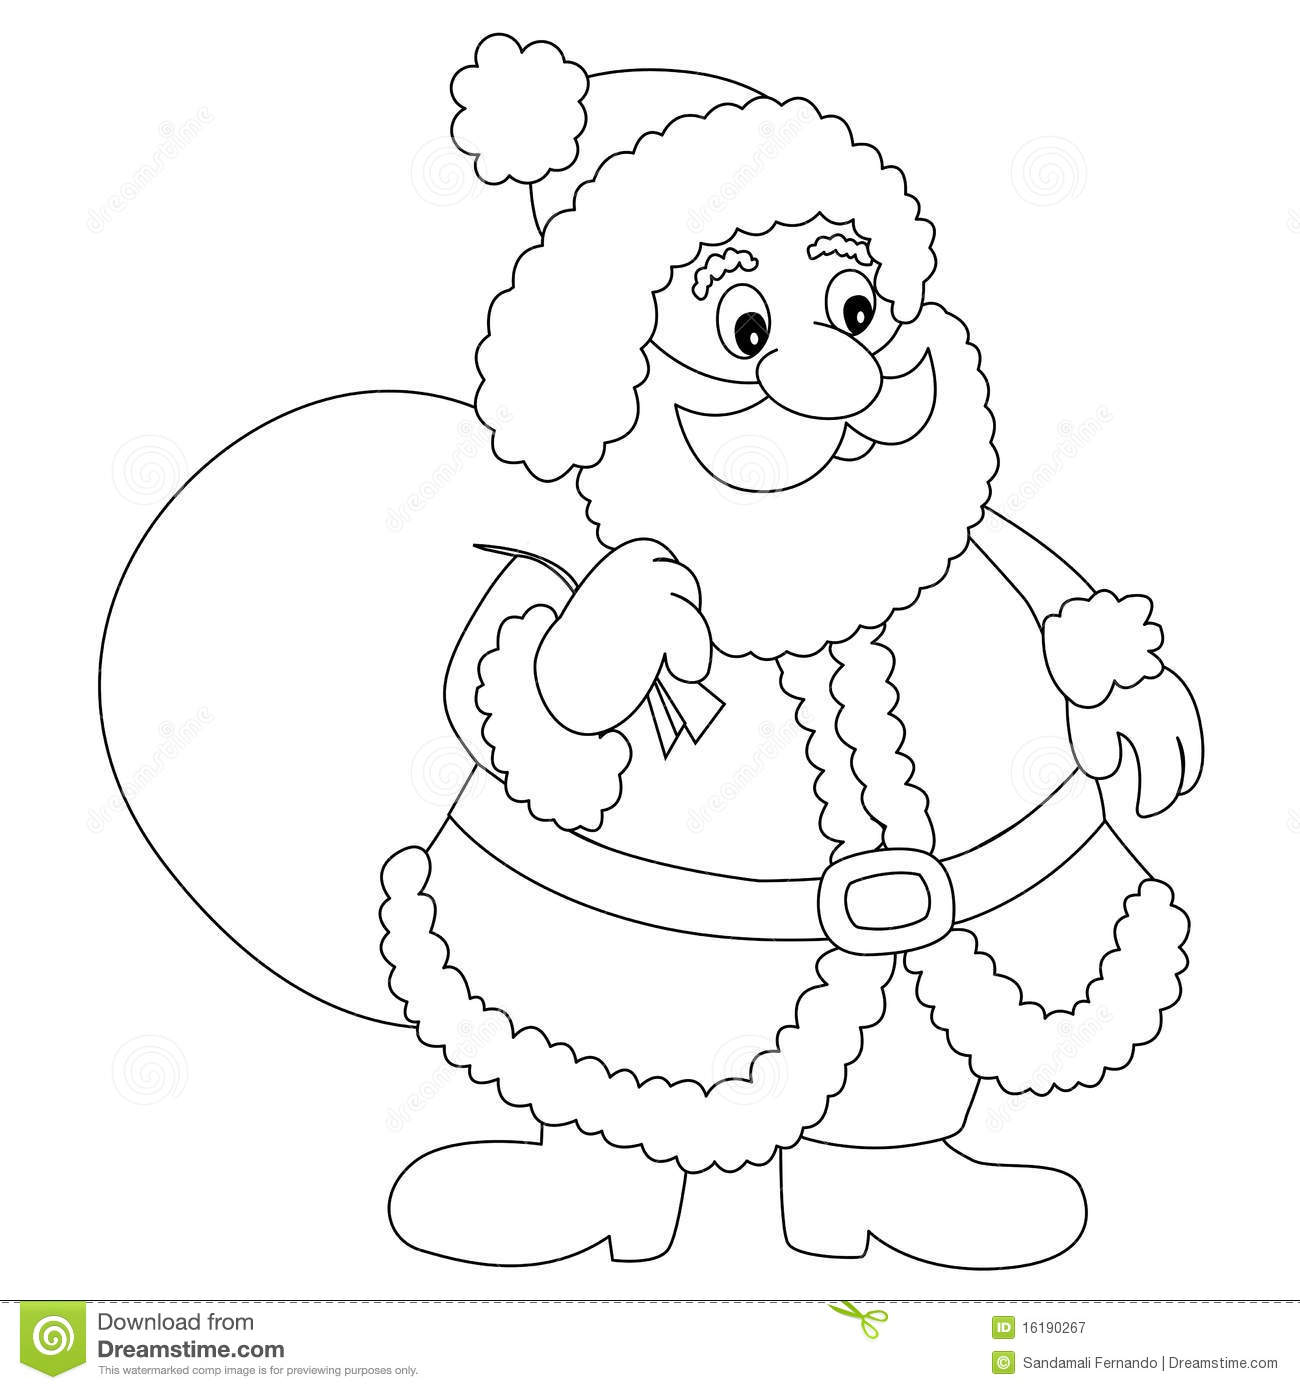 Santa Claus Illustration   Clipart With Gift Bag For Coloring Books